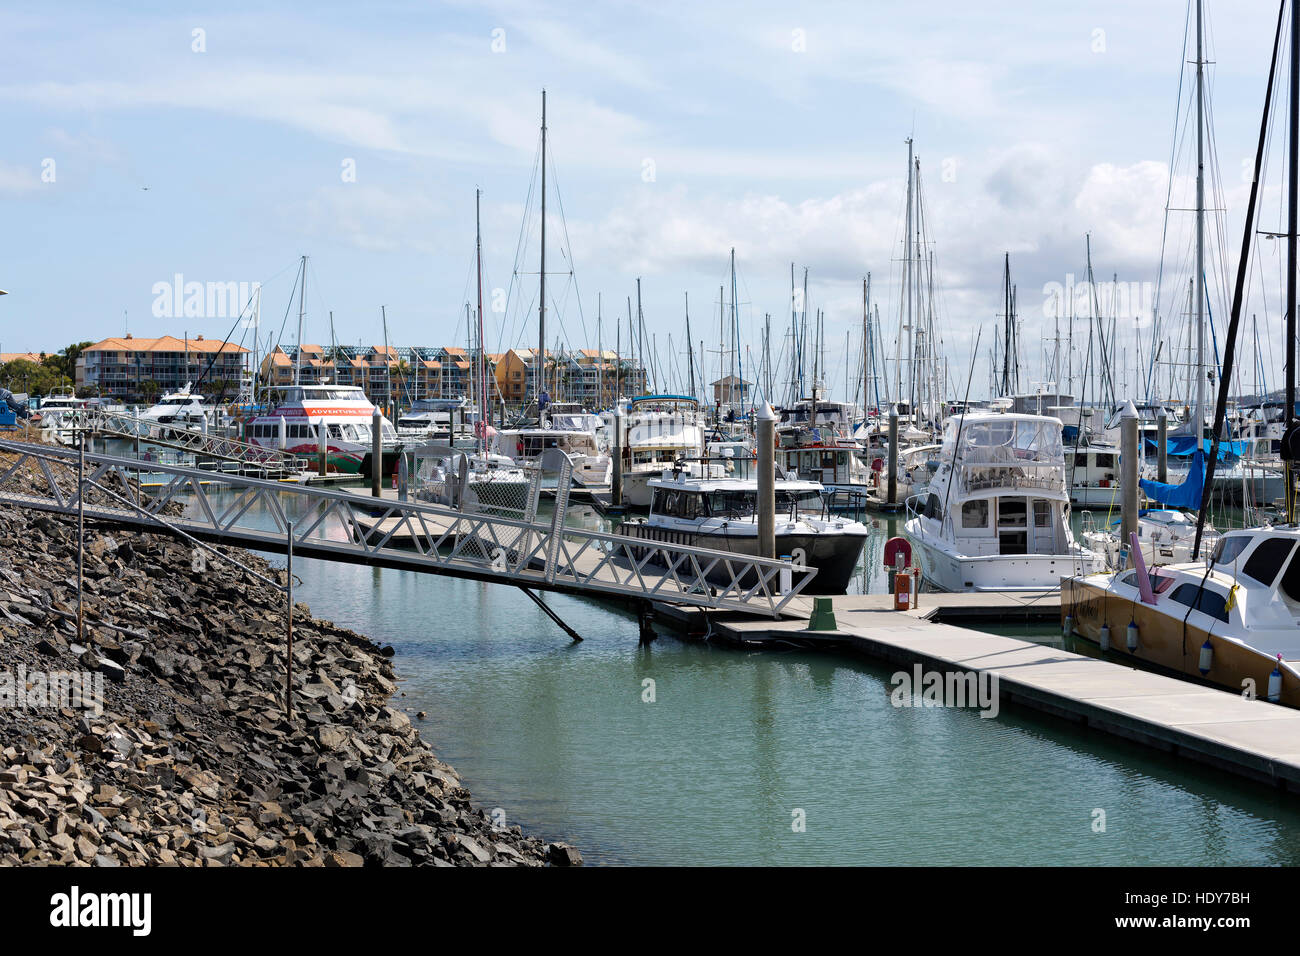 View of the Great Sandy Straits Marina, located on the Northern end of Urangan harbour in Hervey Bay, Australia Stock Photo